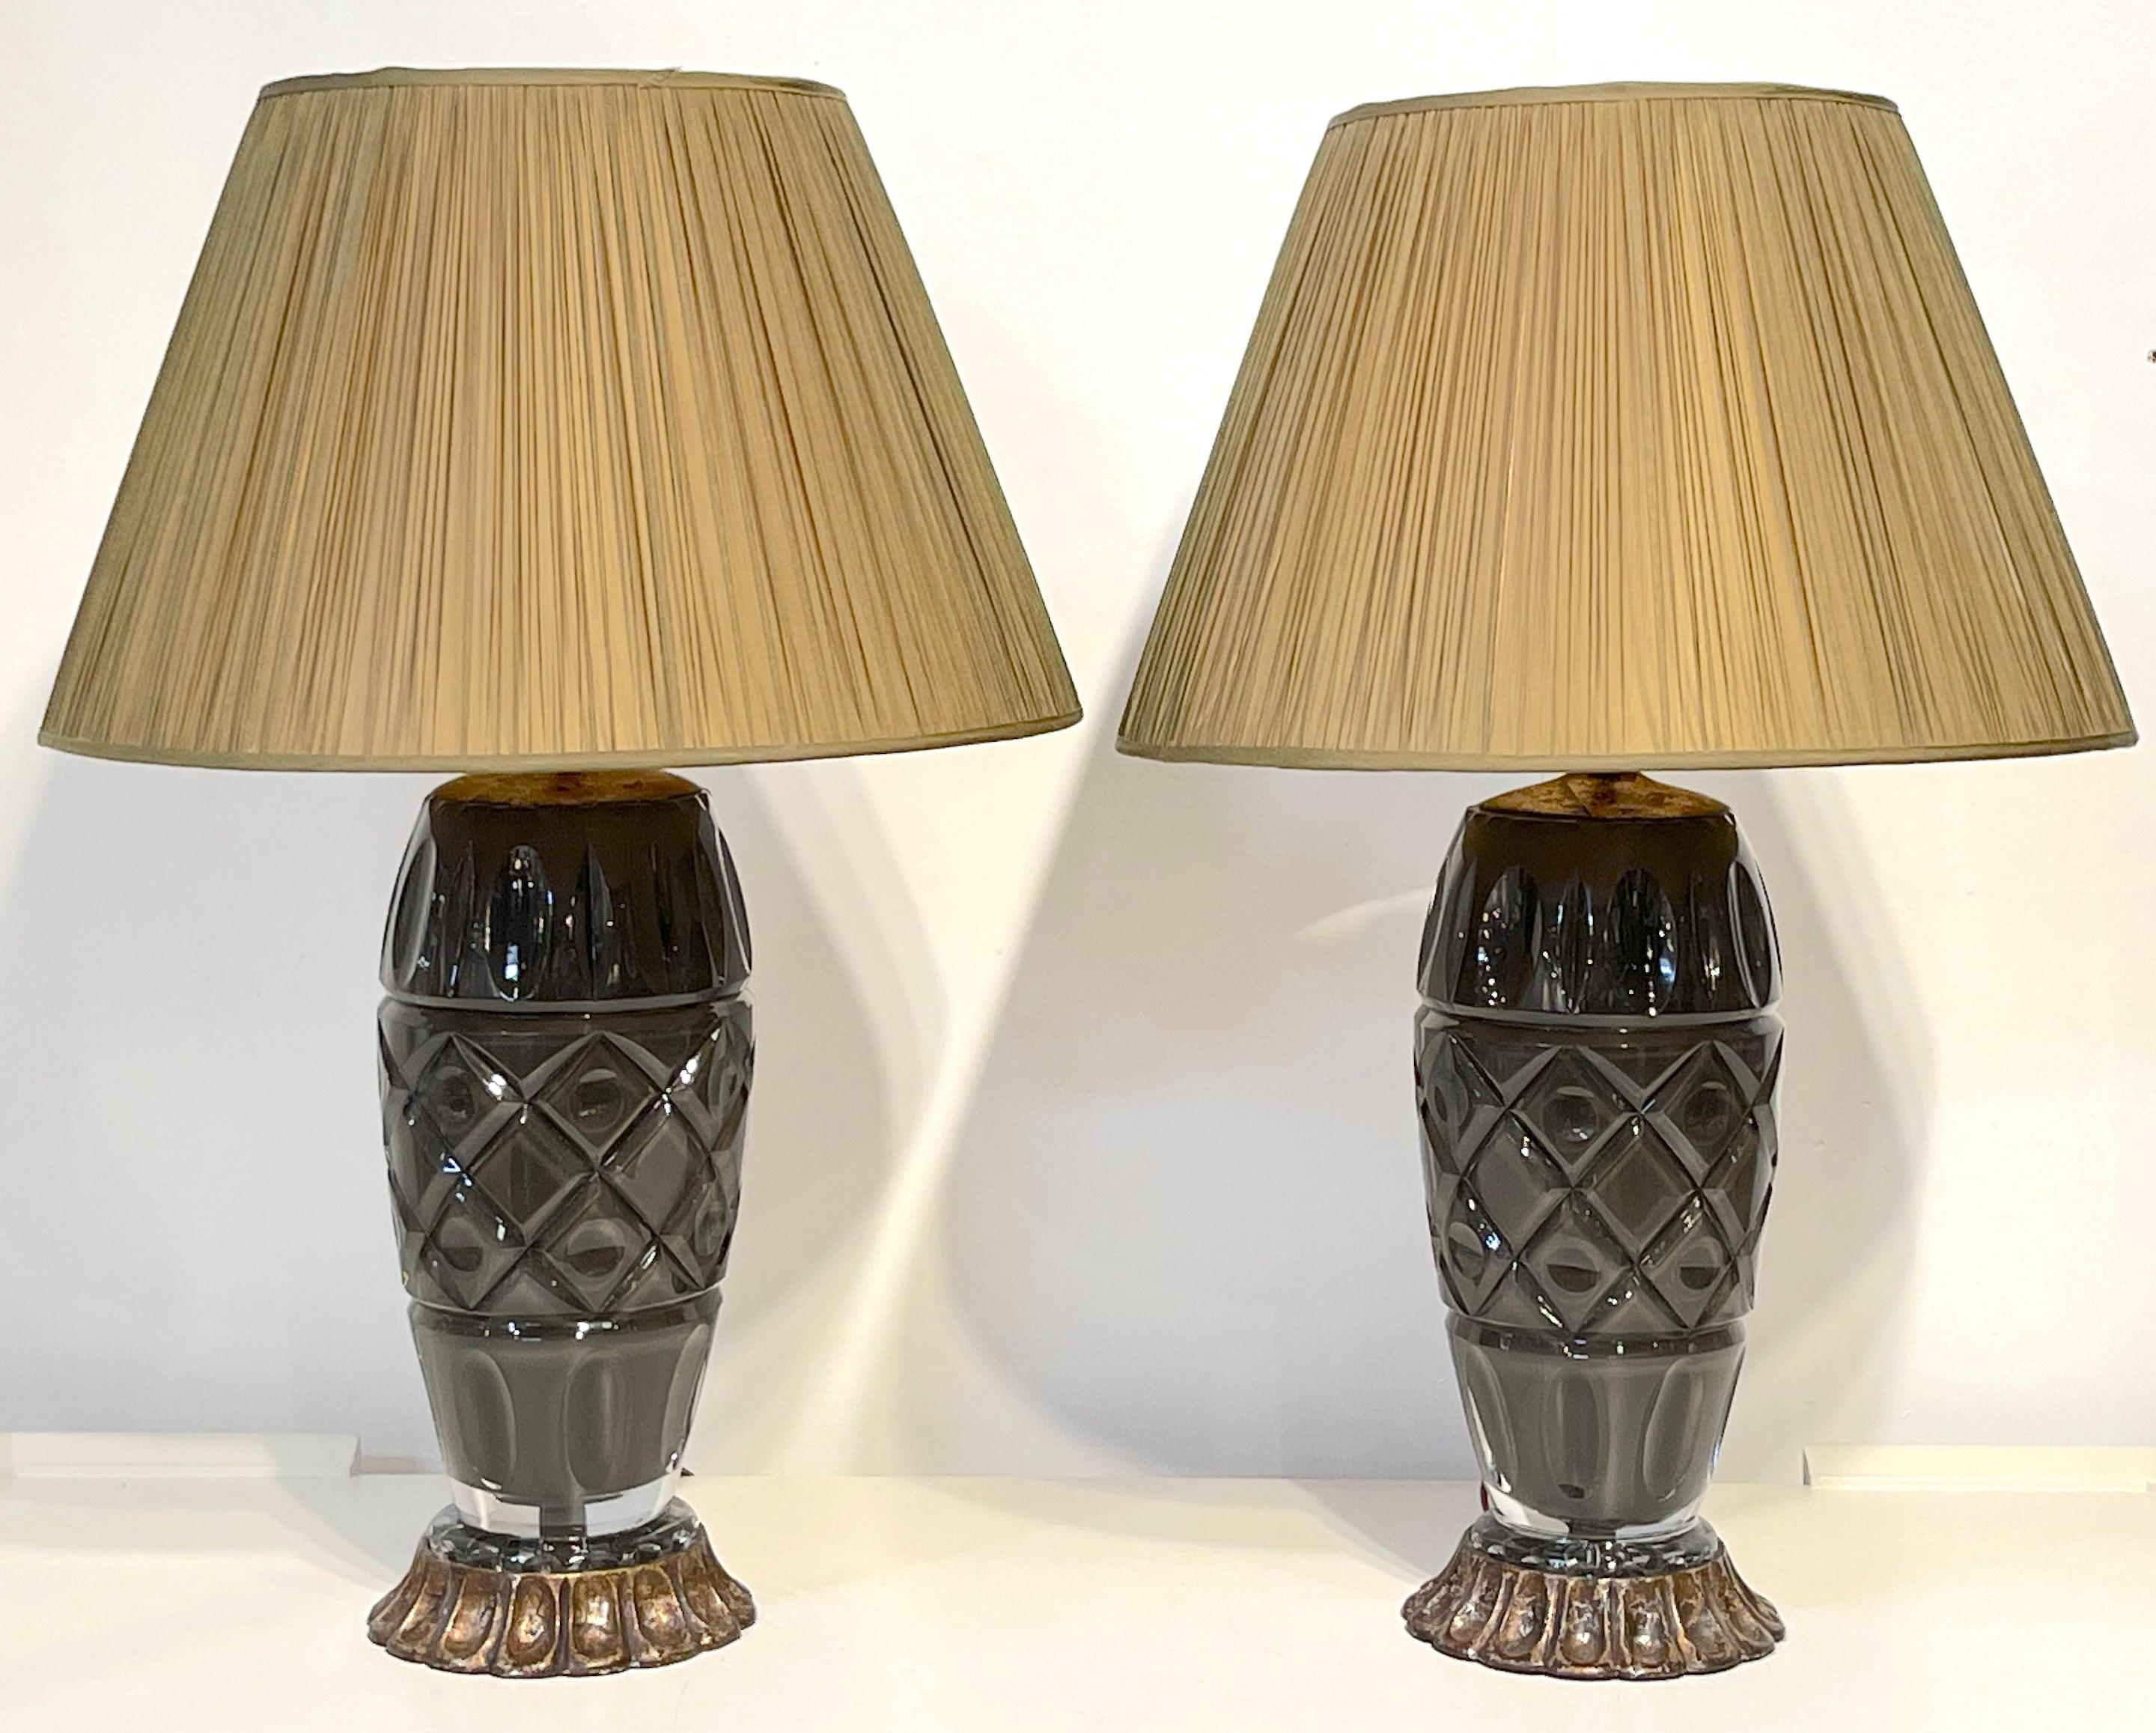 Pair of Moderne Maison Baguès Style Taupe Cut Crystal Lamps 
France, circa 1960s

A sheik pair of Maison Baguès cut taupe crystal vases, raised on carved wood silver leaf bases. Shown with display shades not included. 
Ready to place and shade.